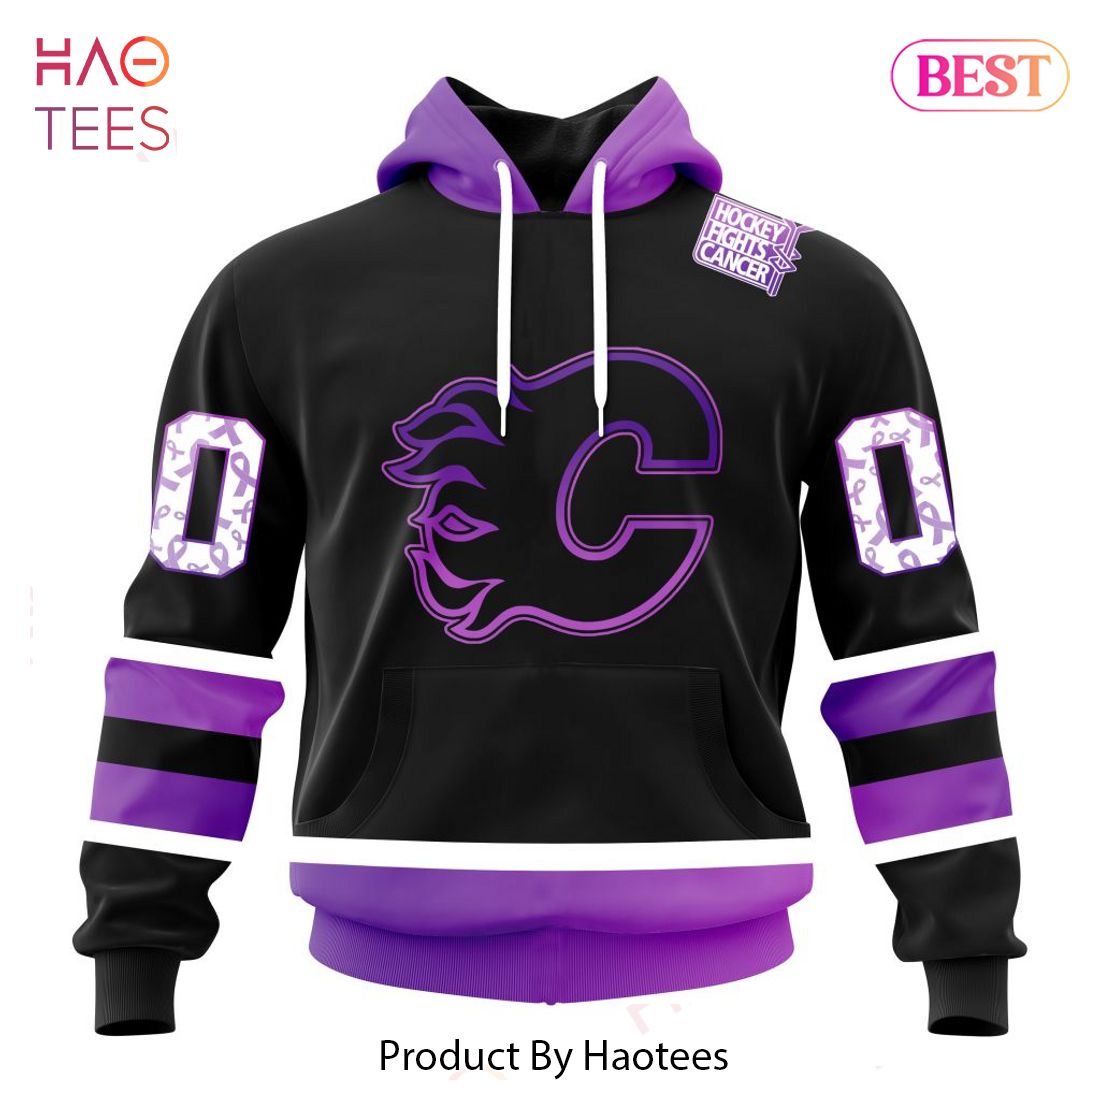 BEST NHL Calgary Flames Special Black Hockey Fights Cancer Kits 3D Hoodie